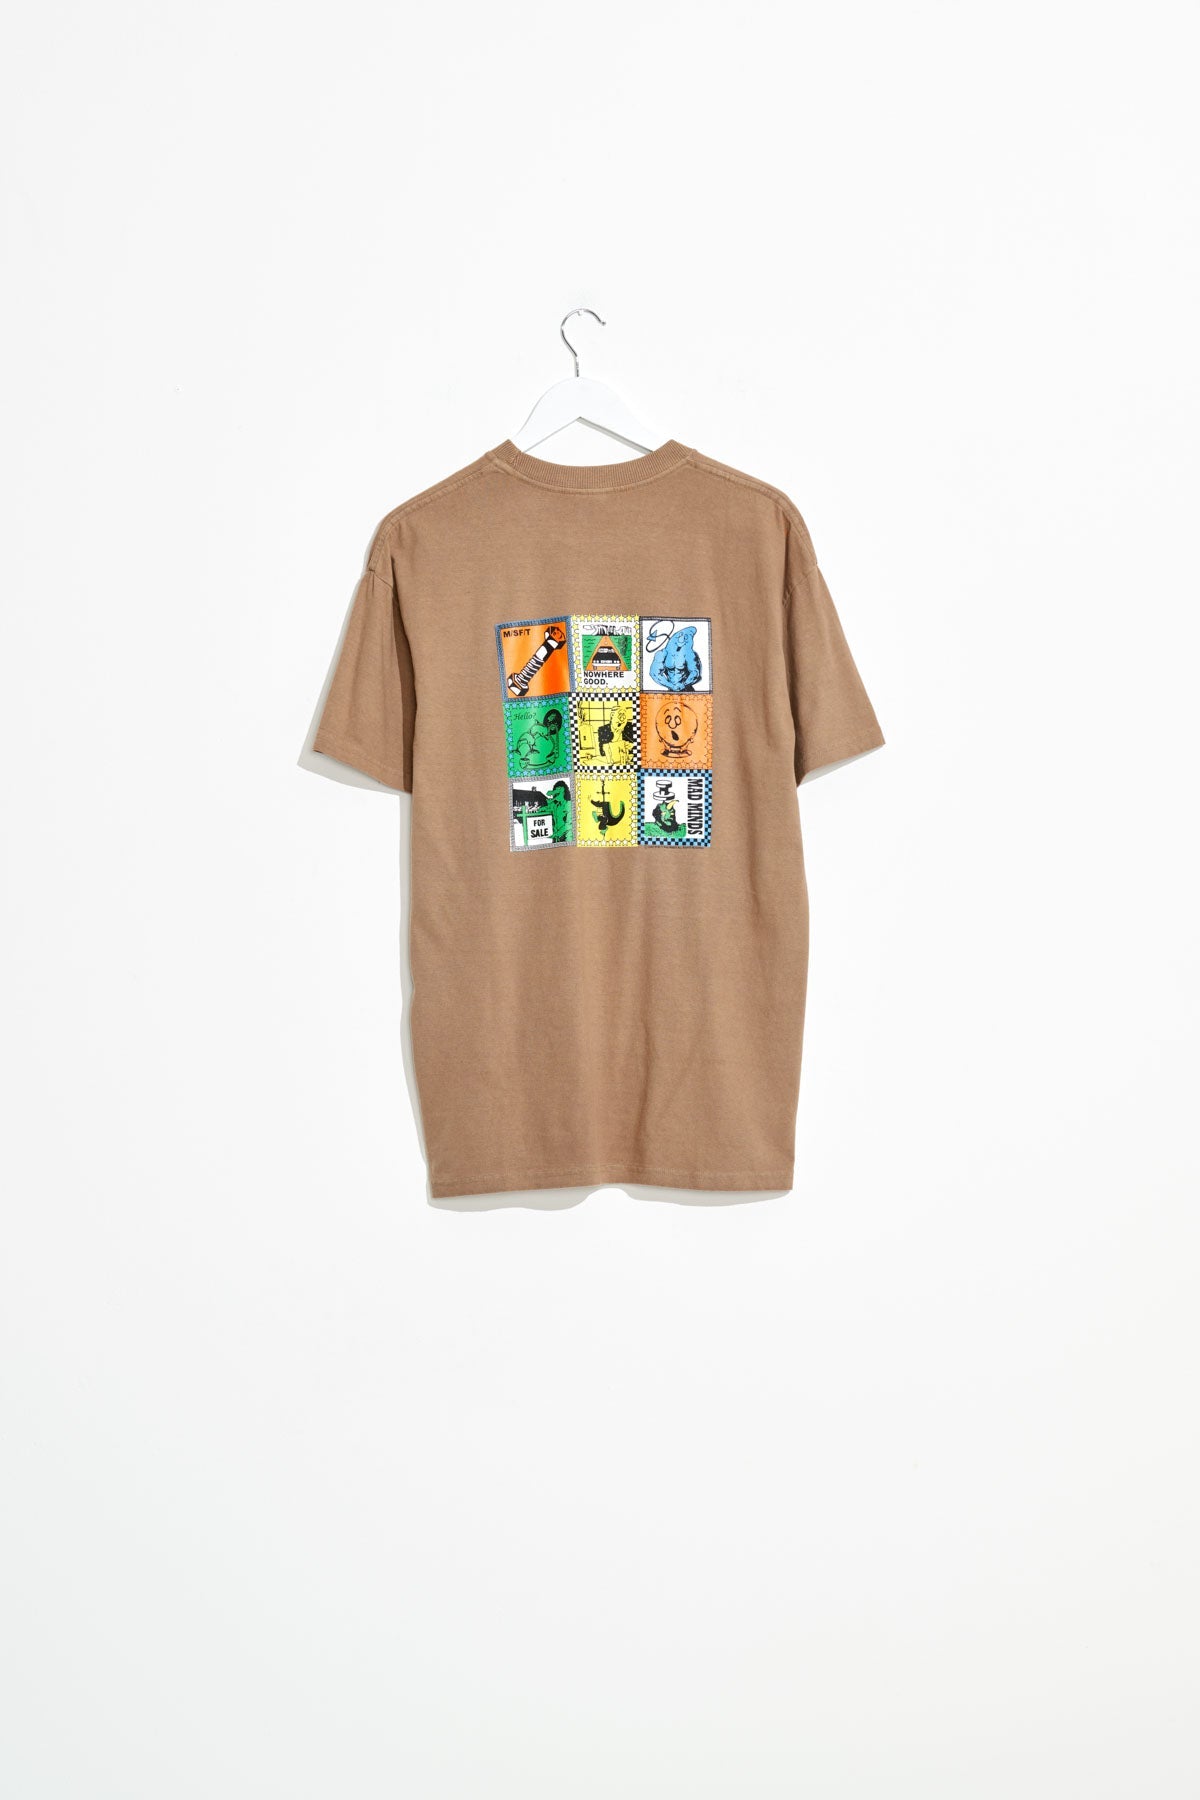 Misfit Shapes - Spirit Level 50-50 Aaa SS Tee - Pigment Stone